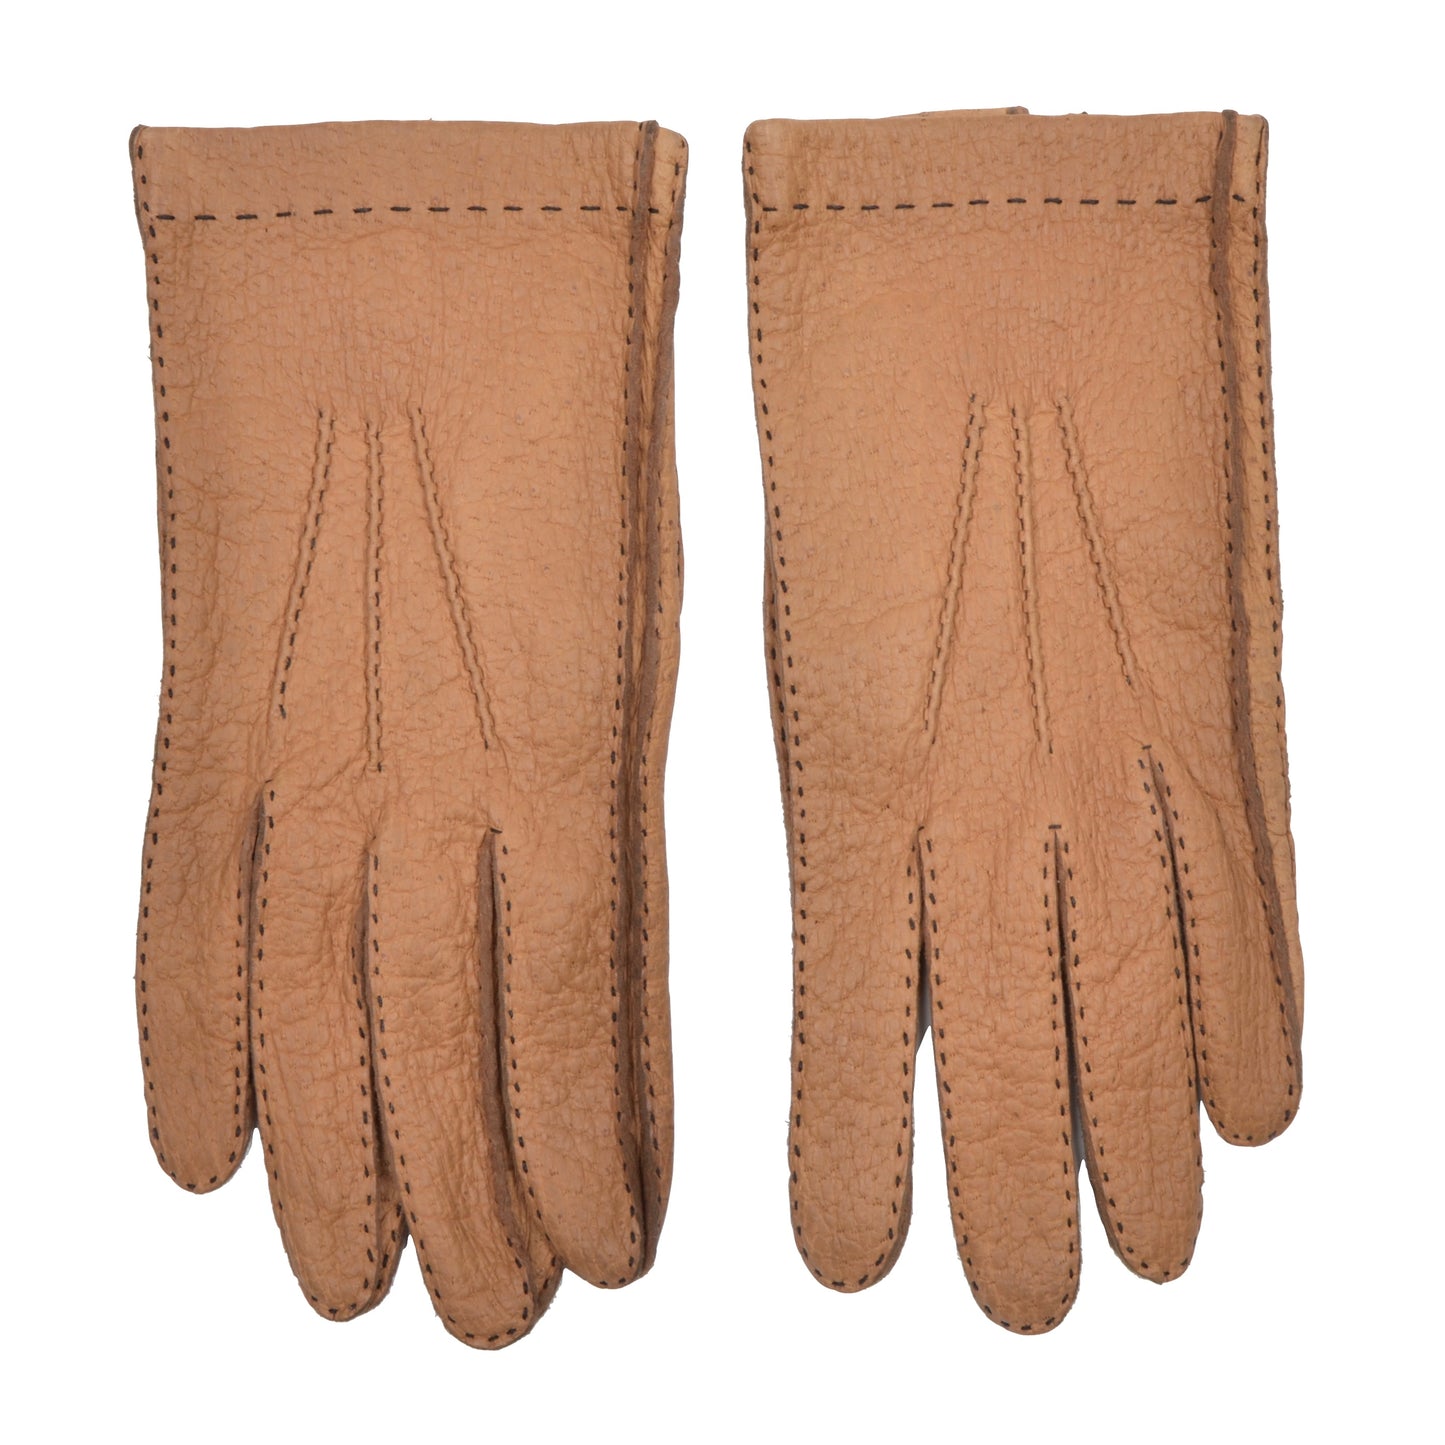 Unlined Peccary Gloves Size 8 - Tan